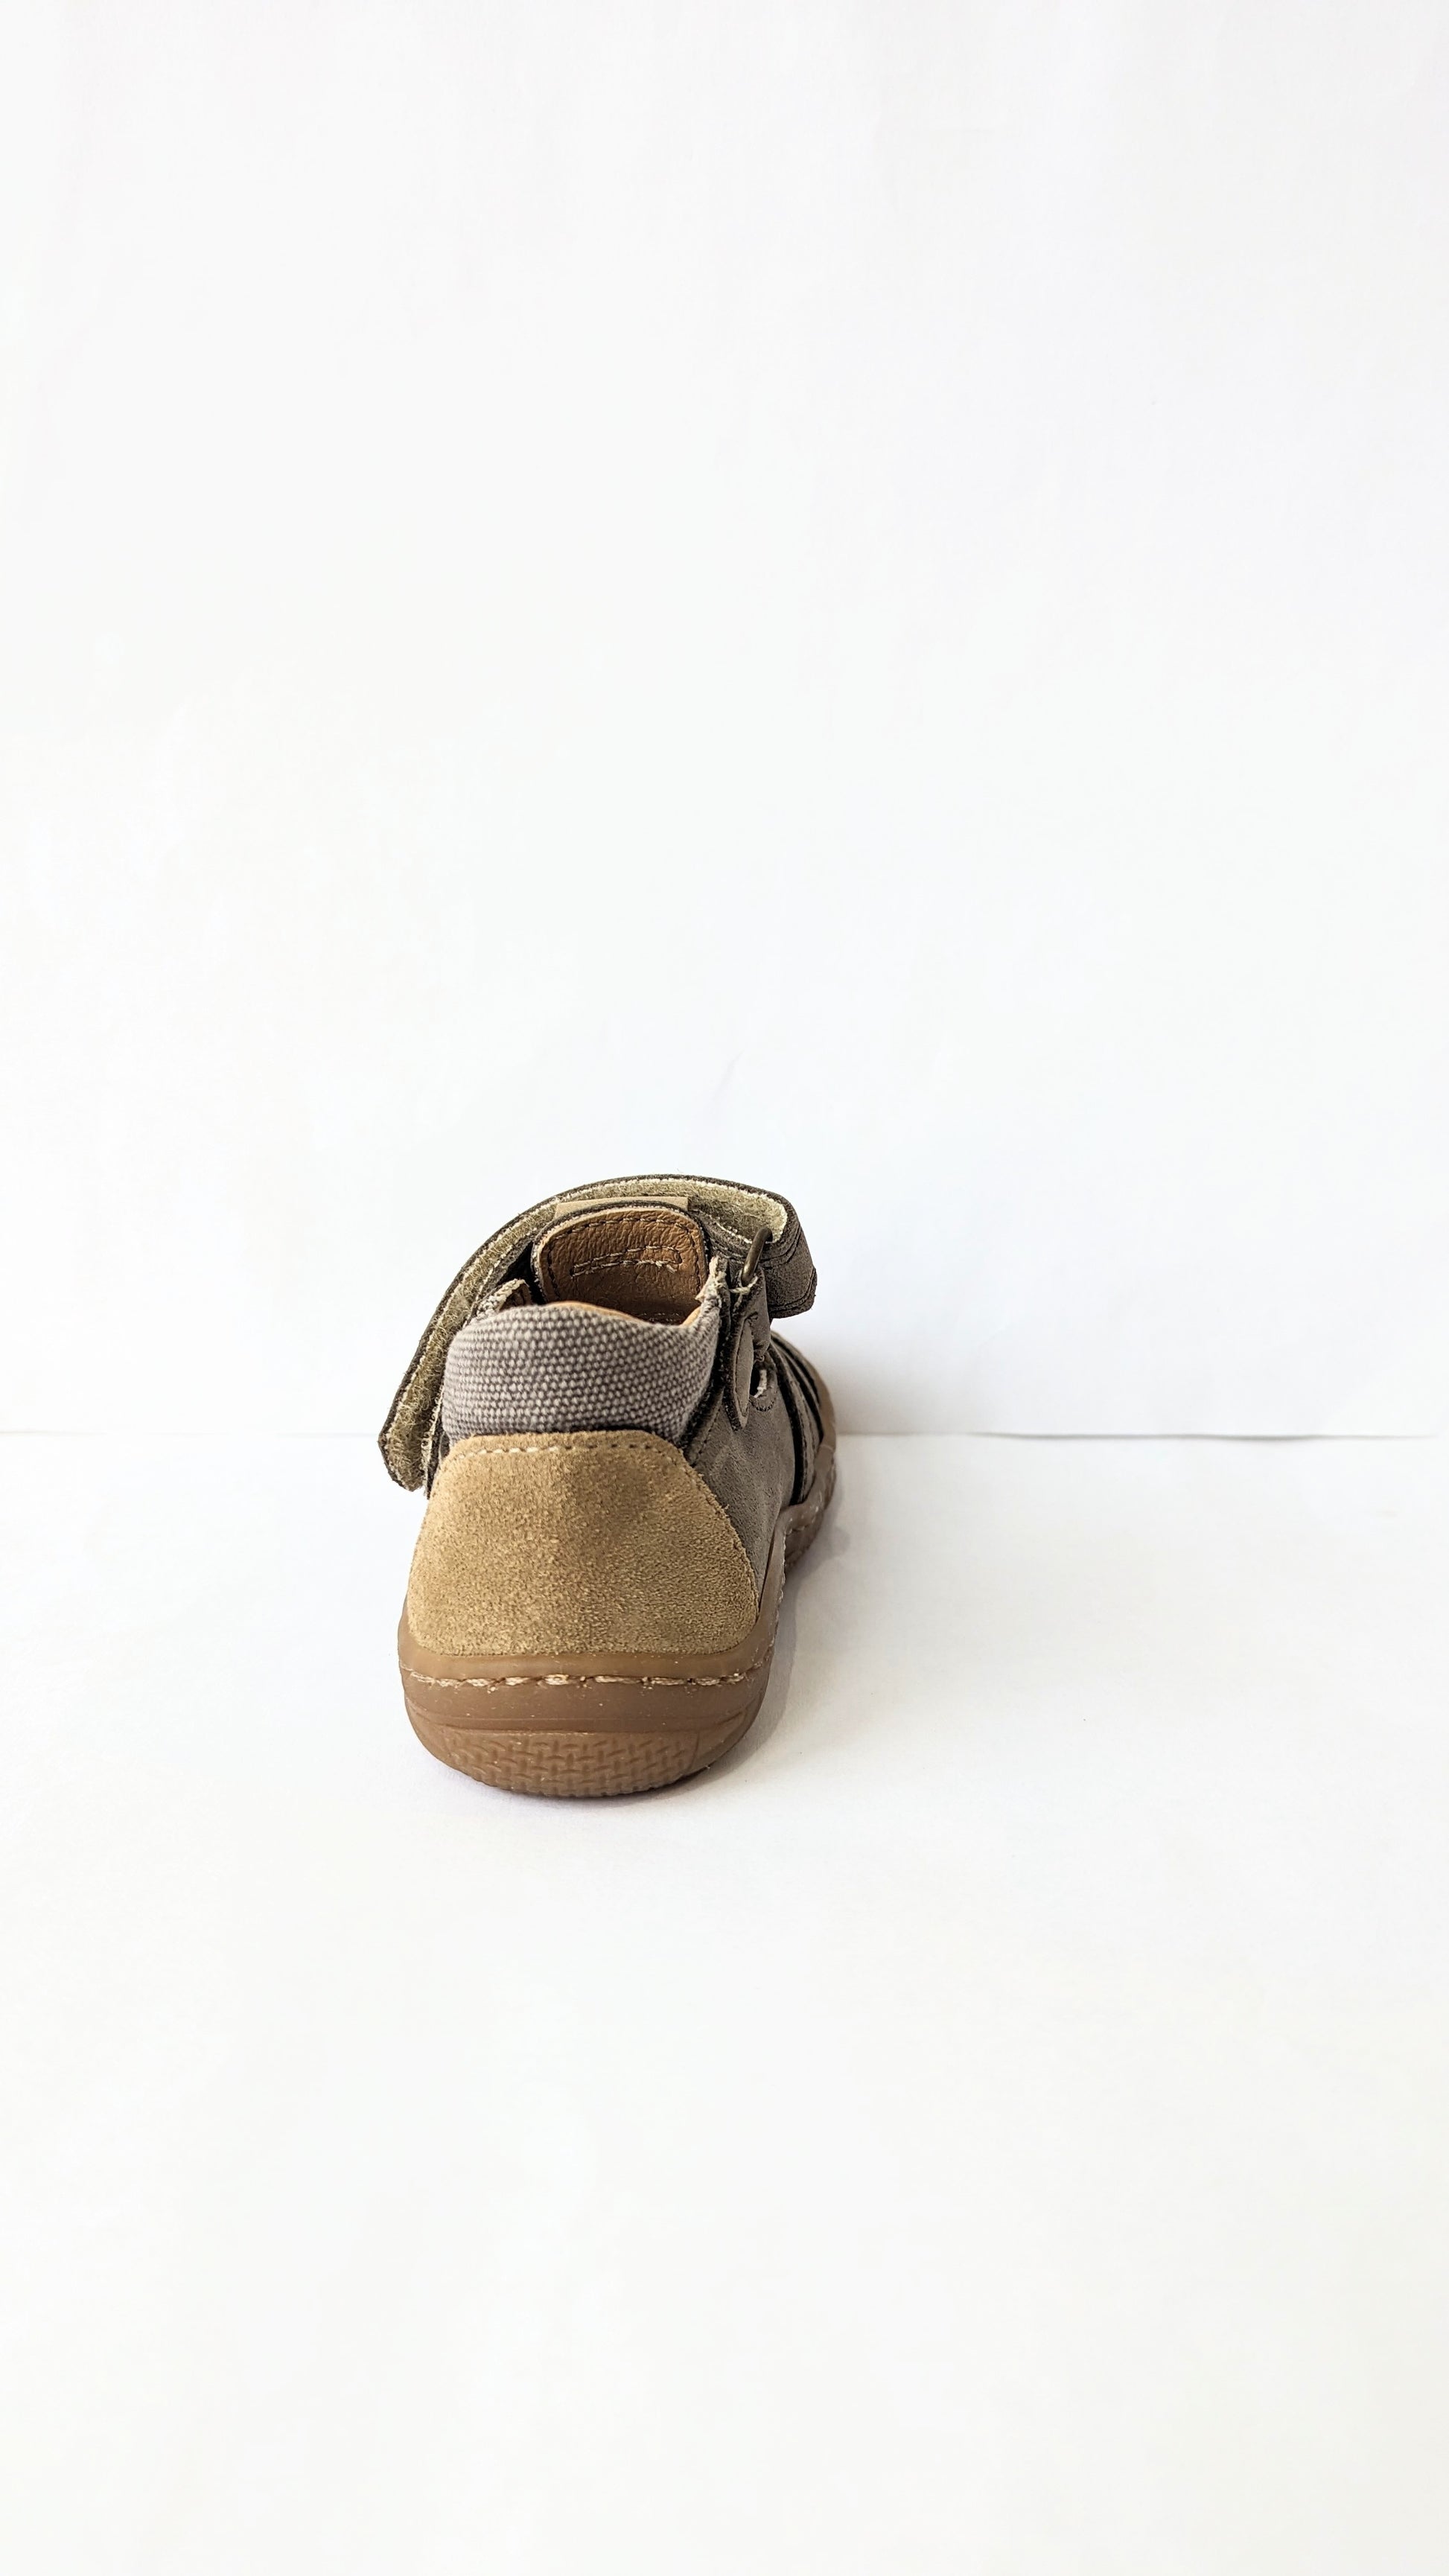 A boys shoe by Bopy, style Jacour, in khaki nubuck with double velcro fastening and toe bumper. Back view.